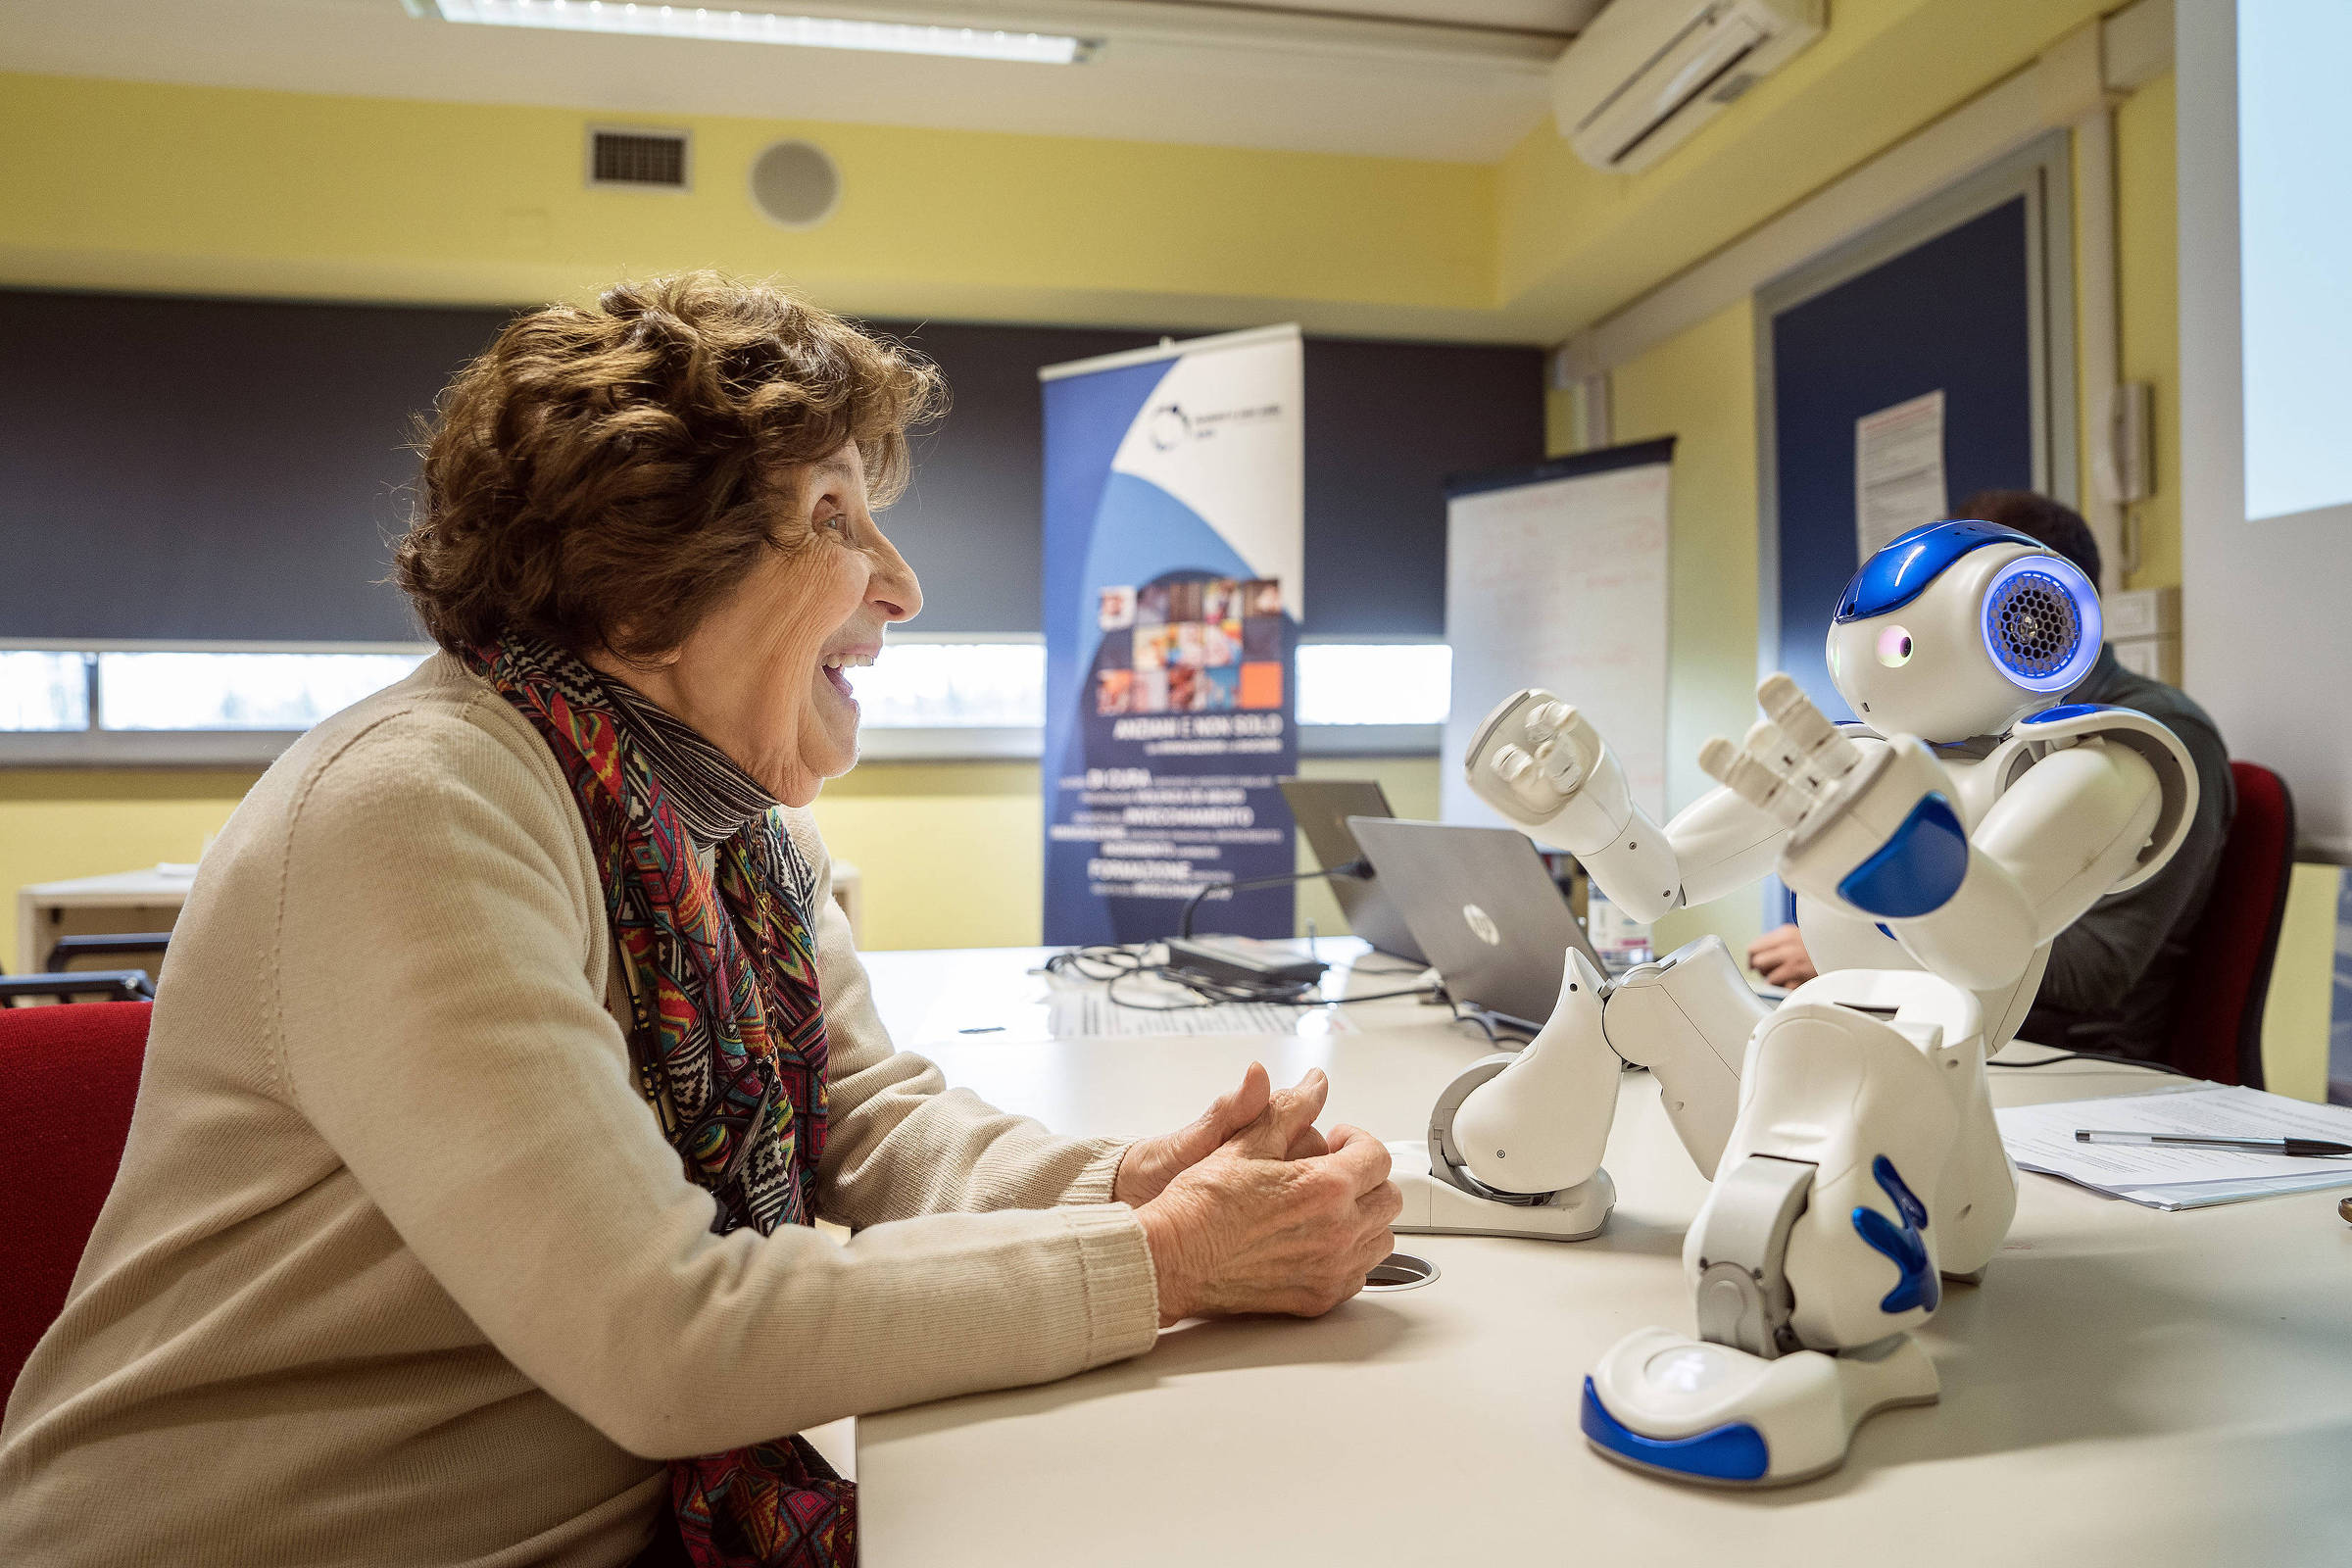 Italy seeks allied robots to care for the elderly – 03/27/2023 – World